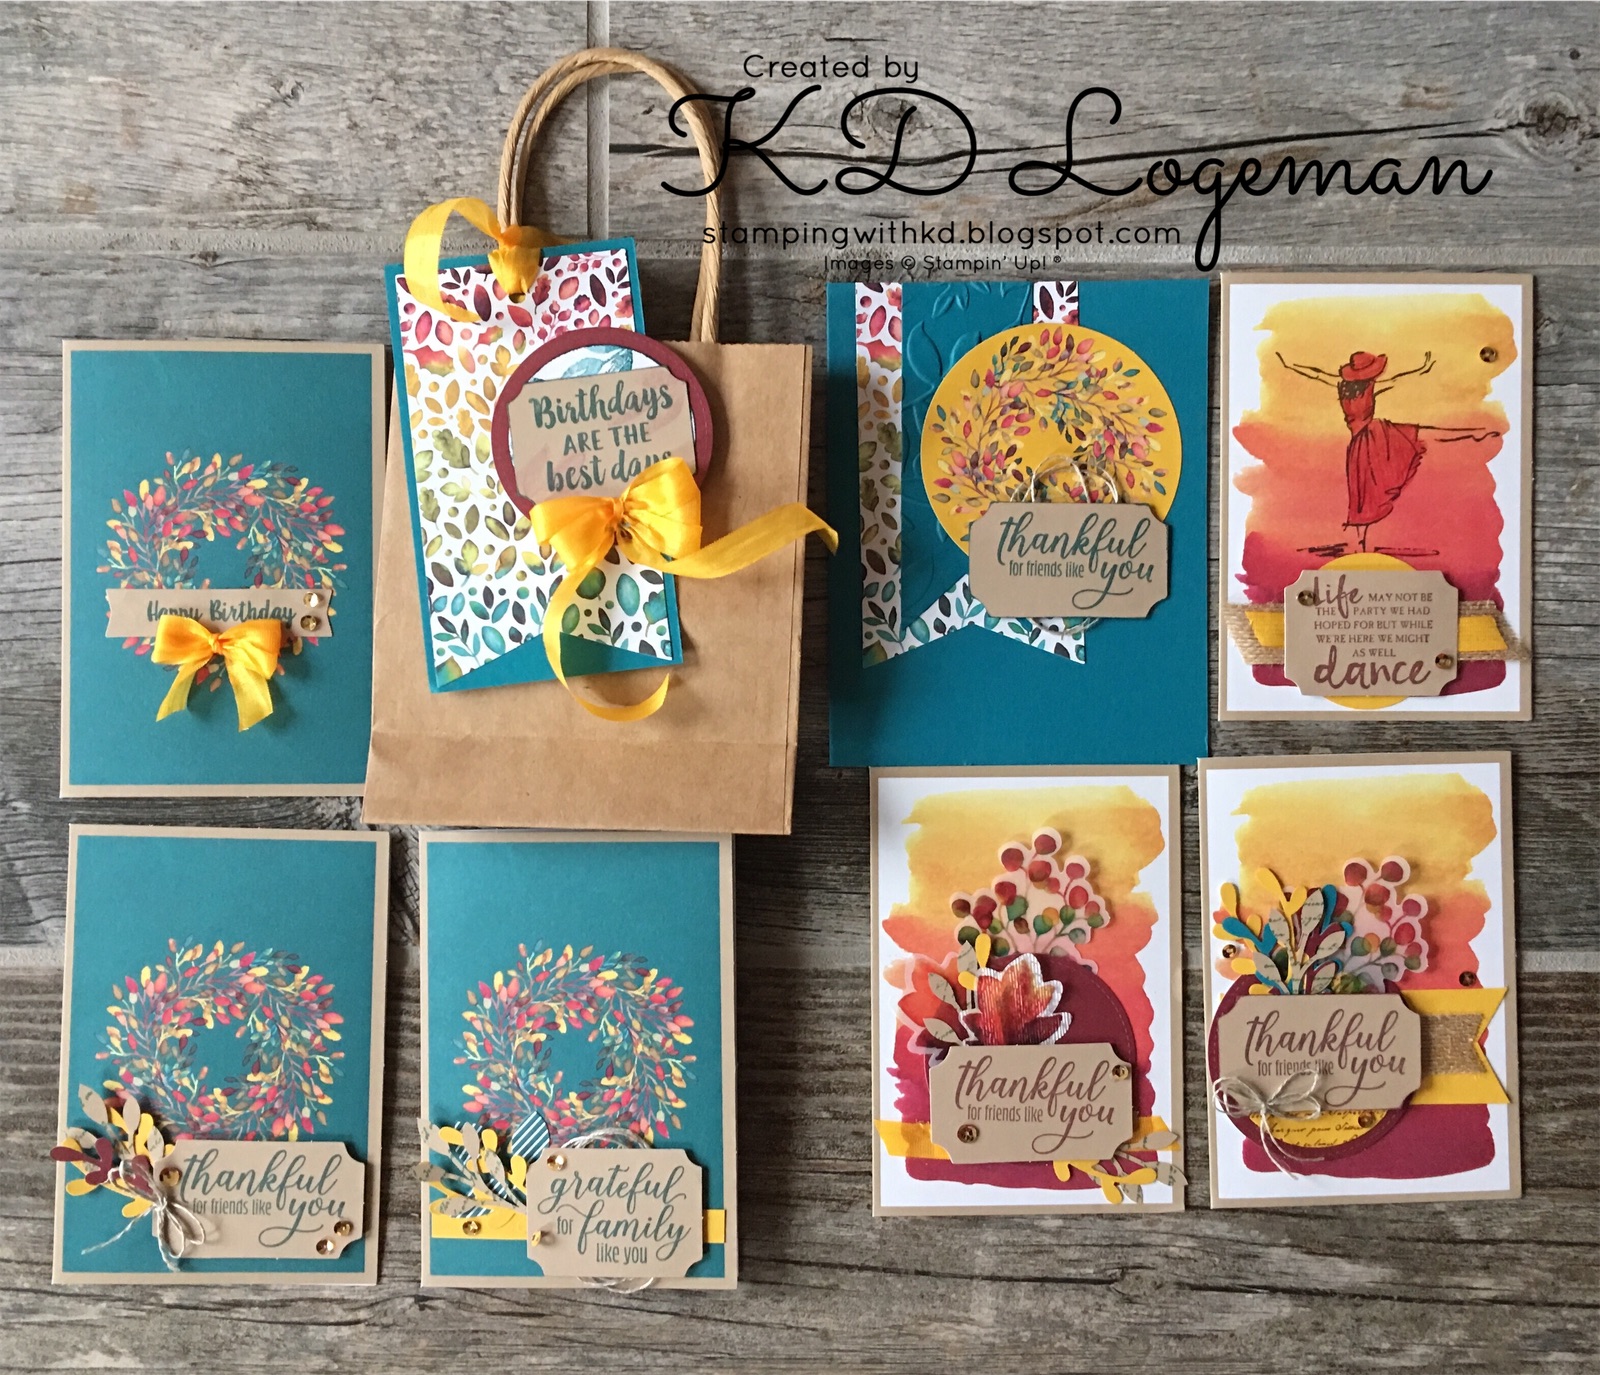 Stampin Up August Paper Pumpkin Kit Alternatives Stamping with KD